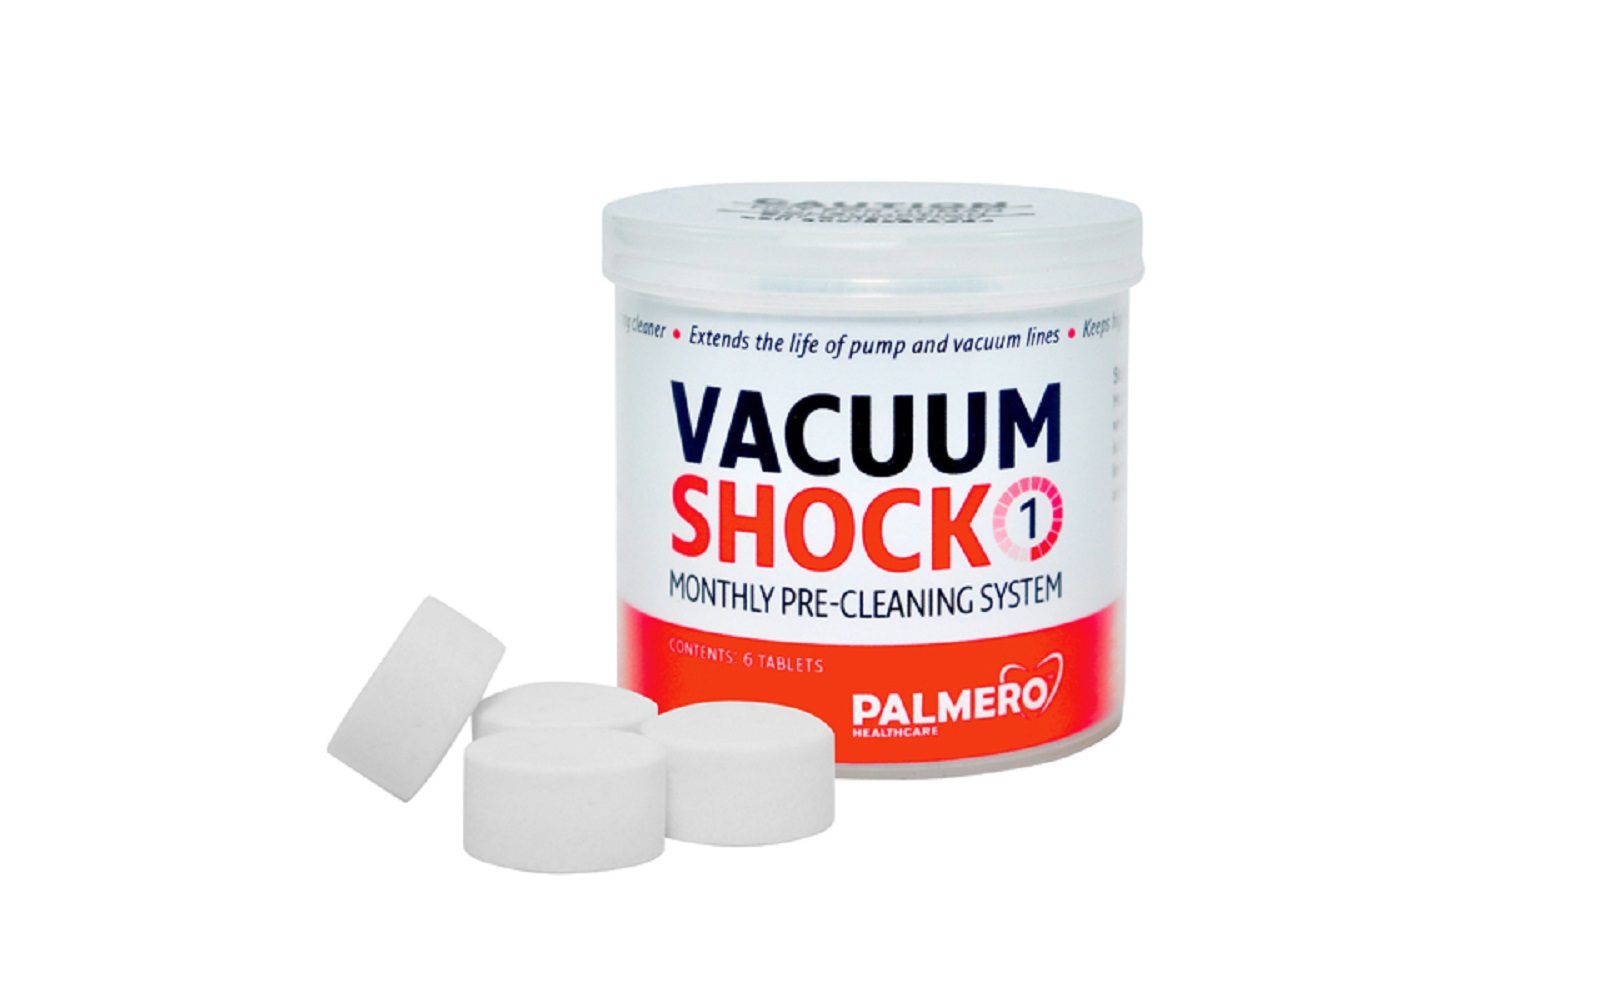 Vacuum shock time release tablets